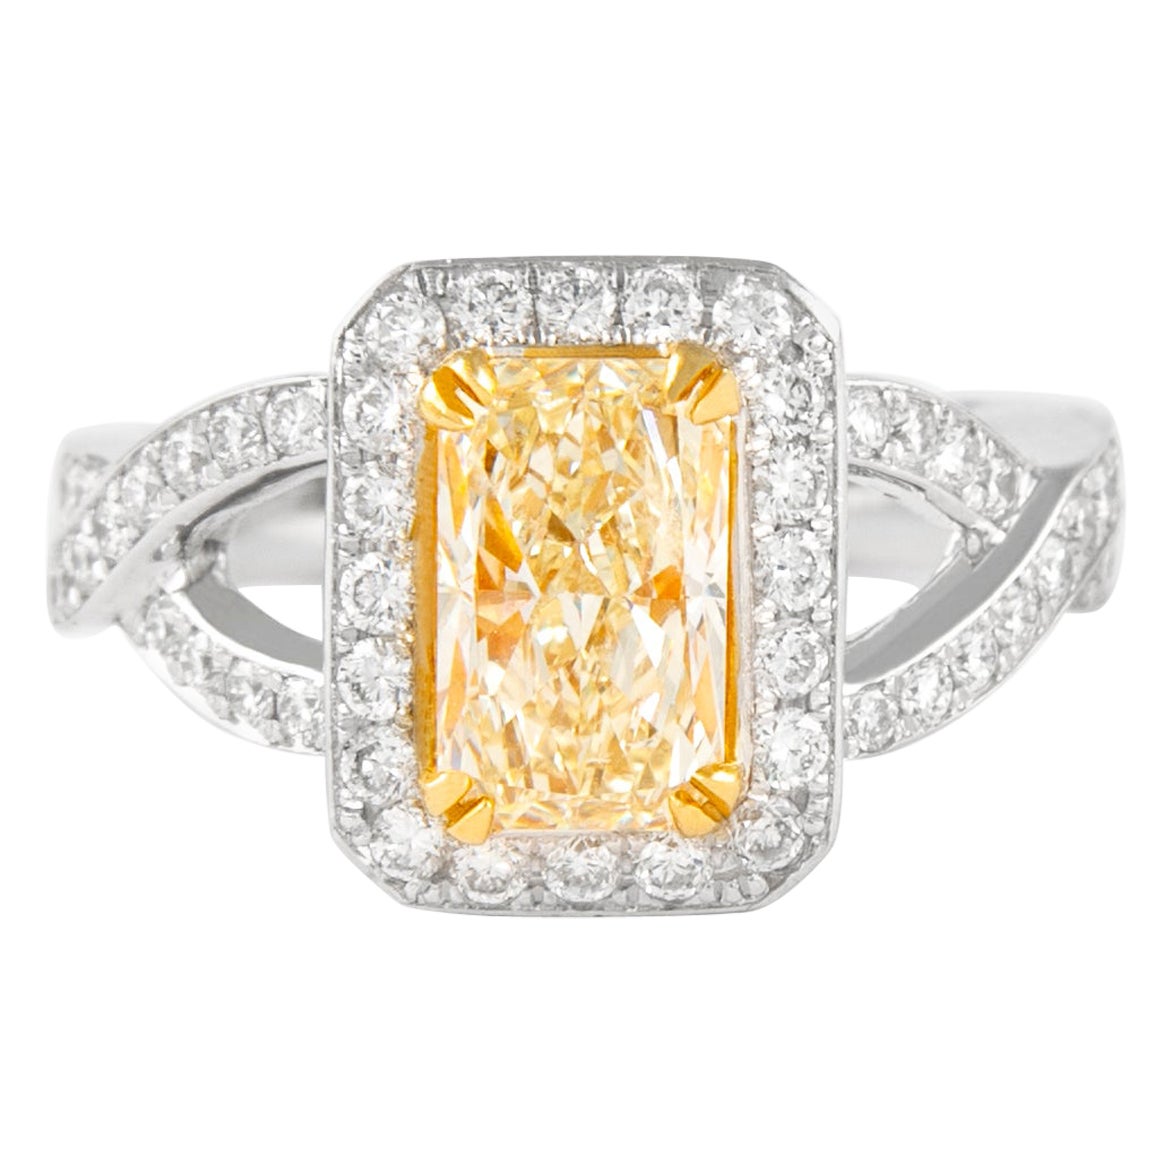 Alexander 2.30ctt Fancy Yellow VS1 Radiant Diamond with Halo Ring 18k Two Tone For Sale